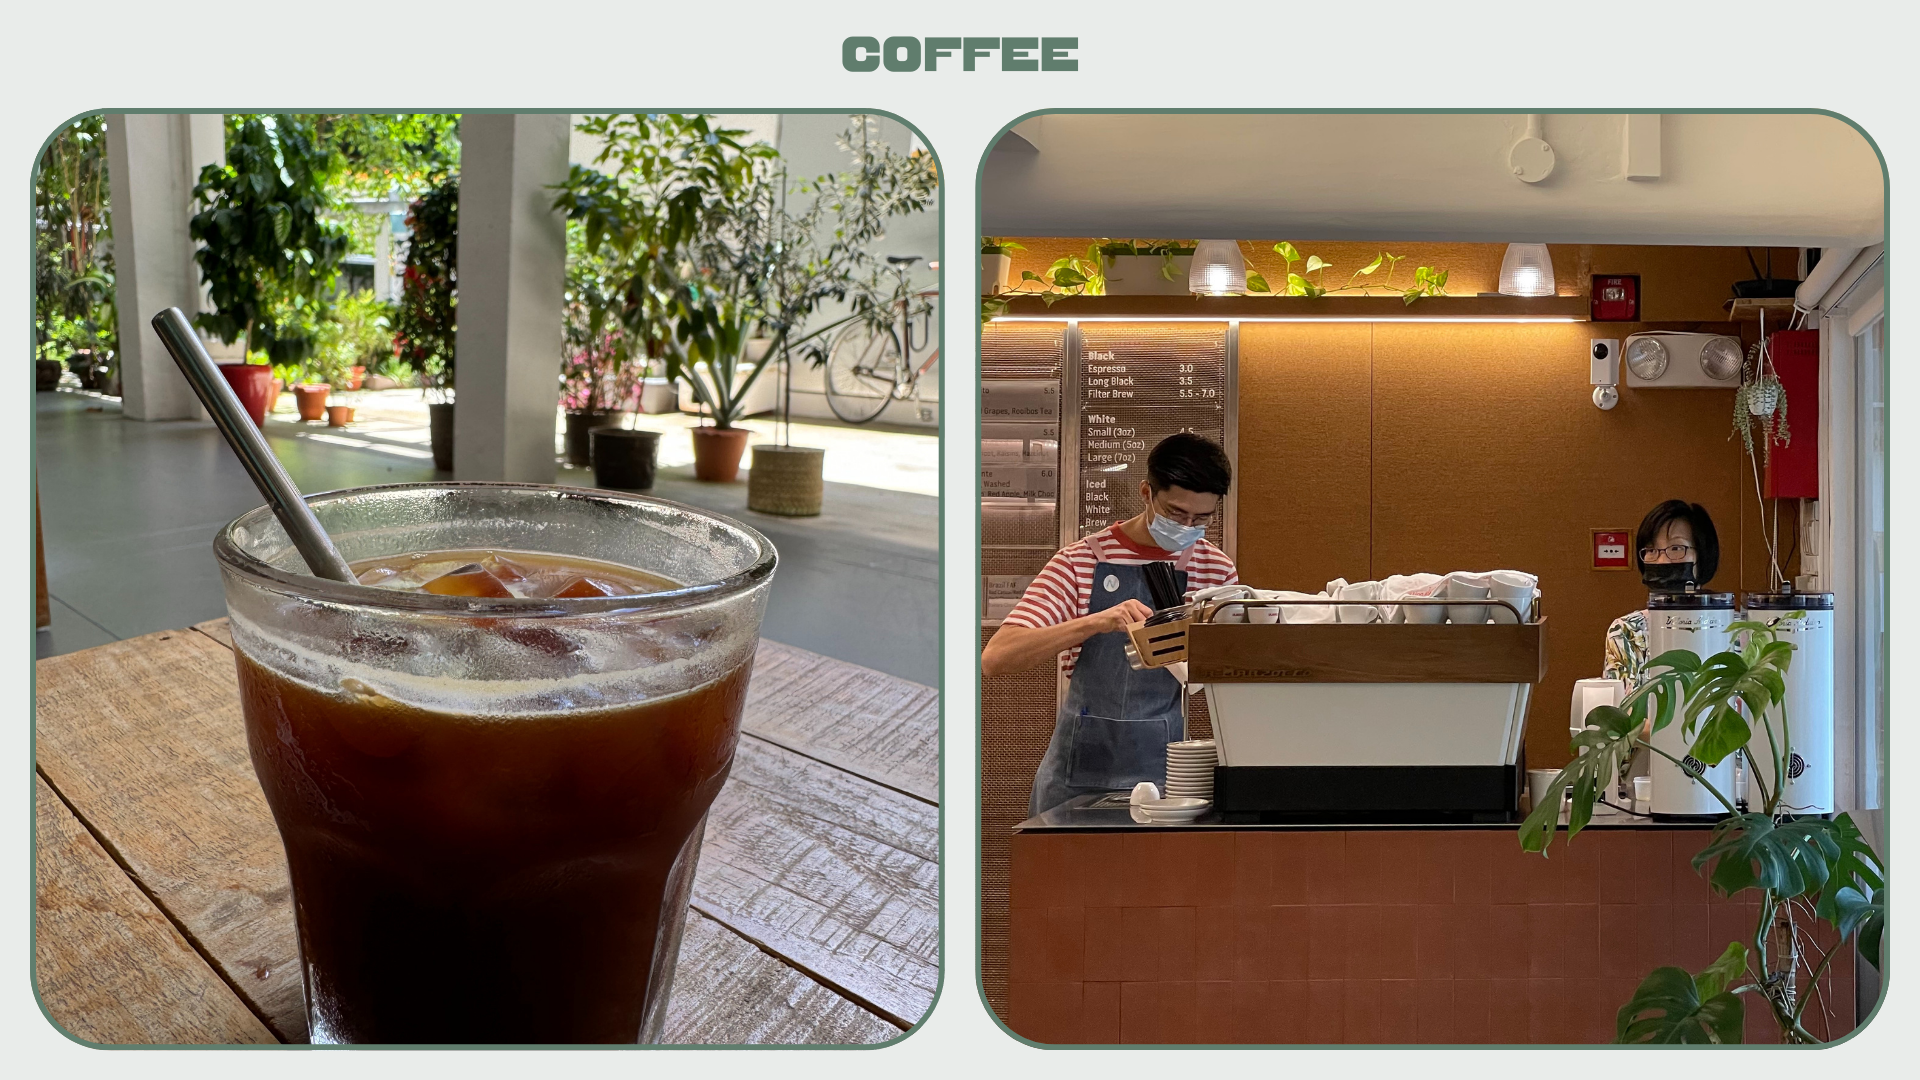 A glass of iced coffee with a straw and two baristas working at the coffee bar